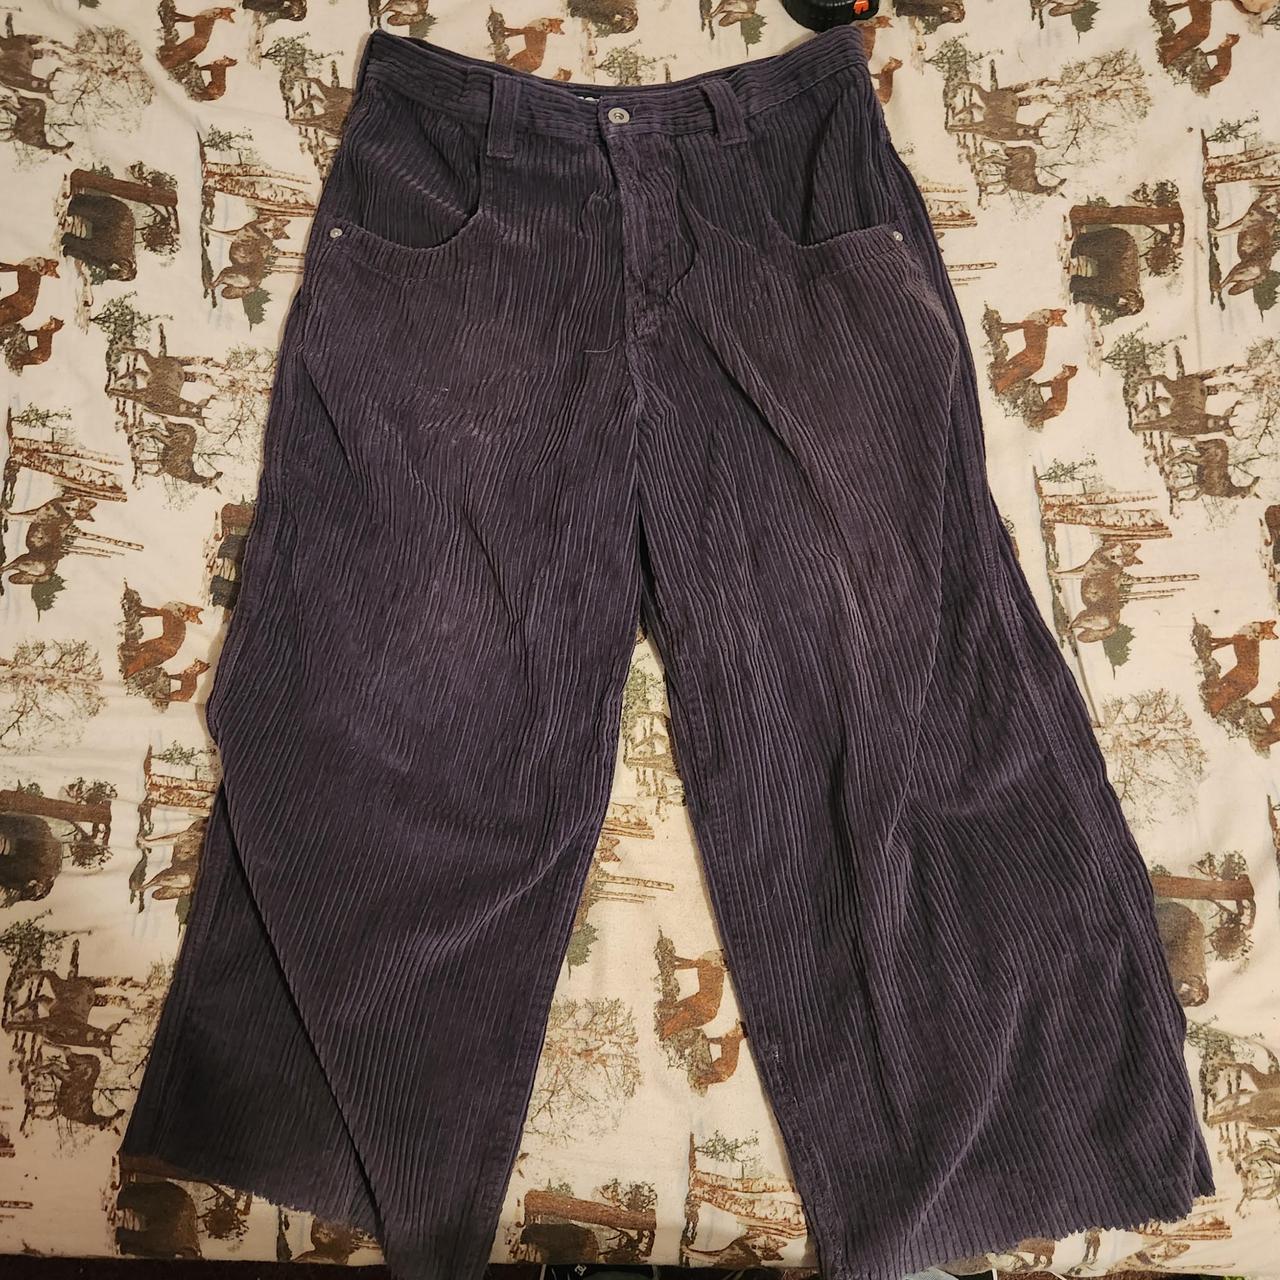 Super Sick Embroidered Cord Corduroy Jnco Twin... - Depop